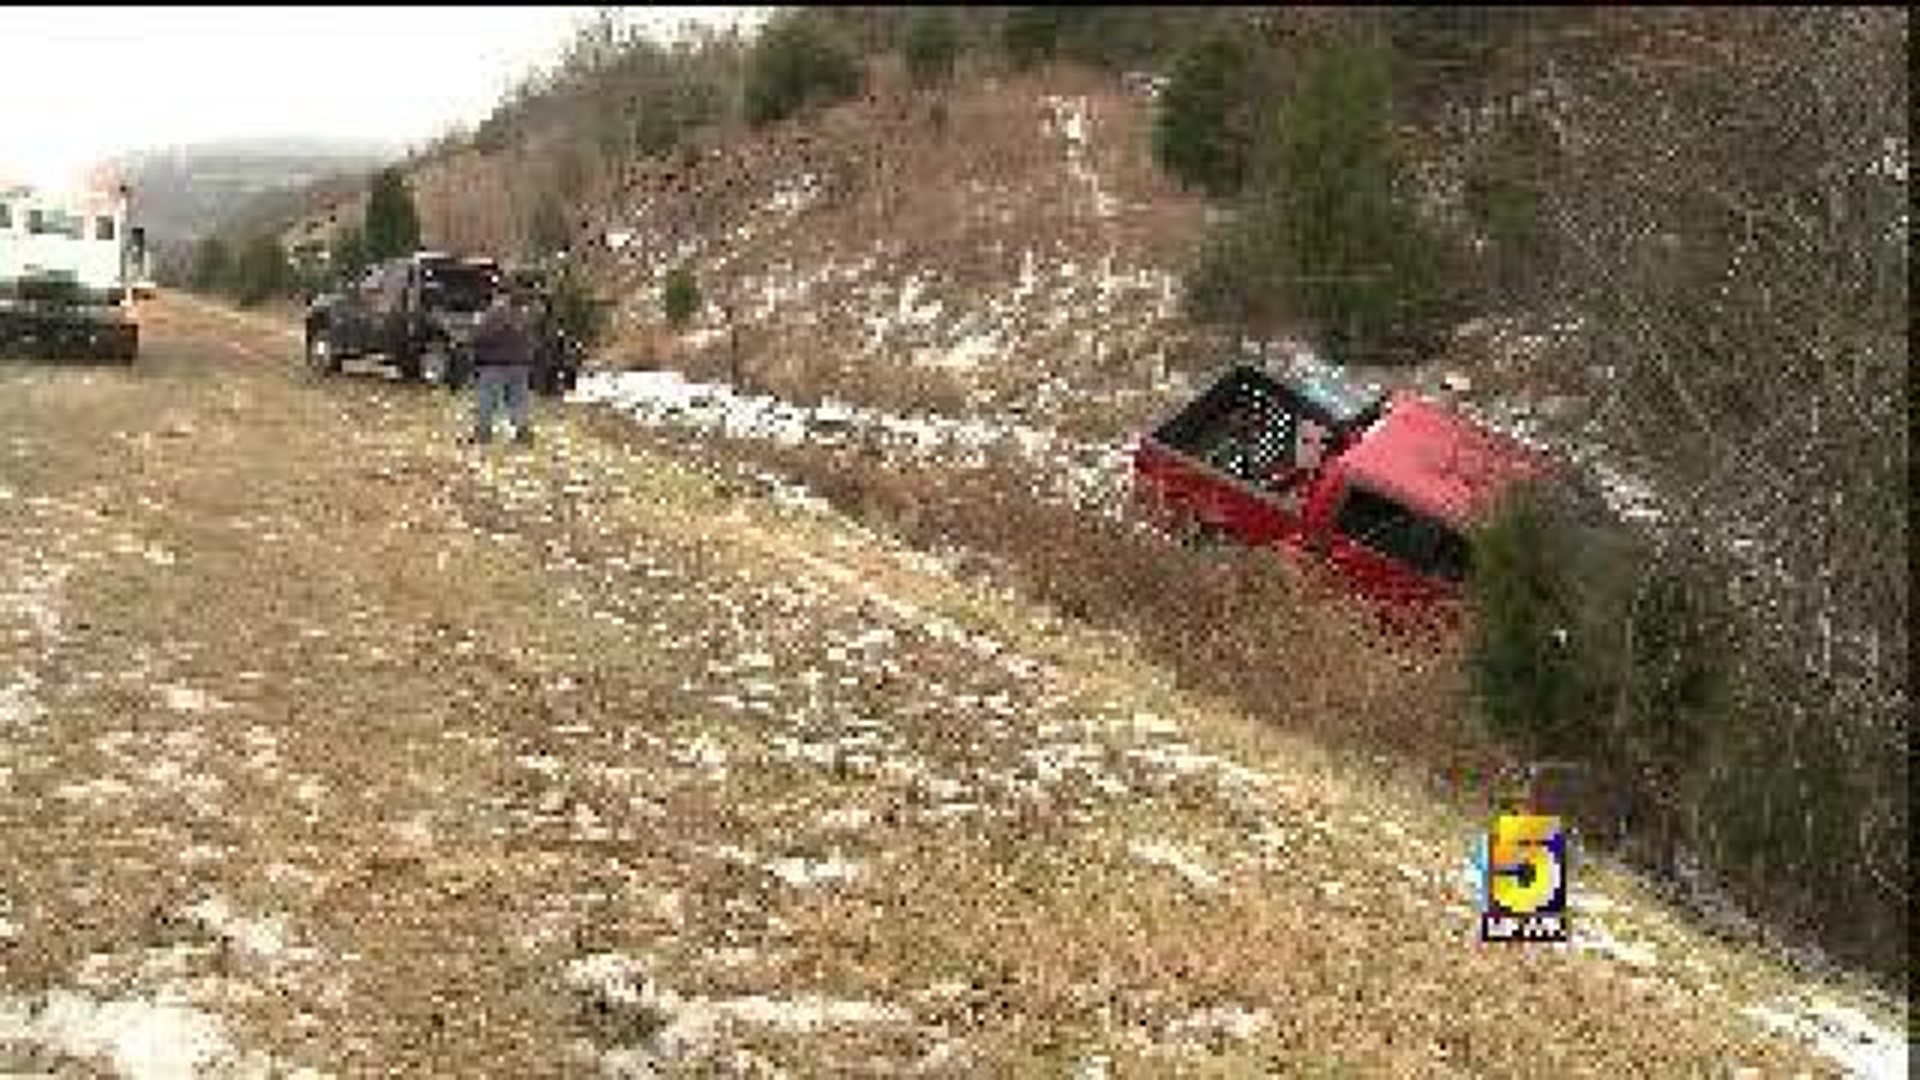 Icy Roads Lead to Accidents, Slow Thursday Commute